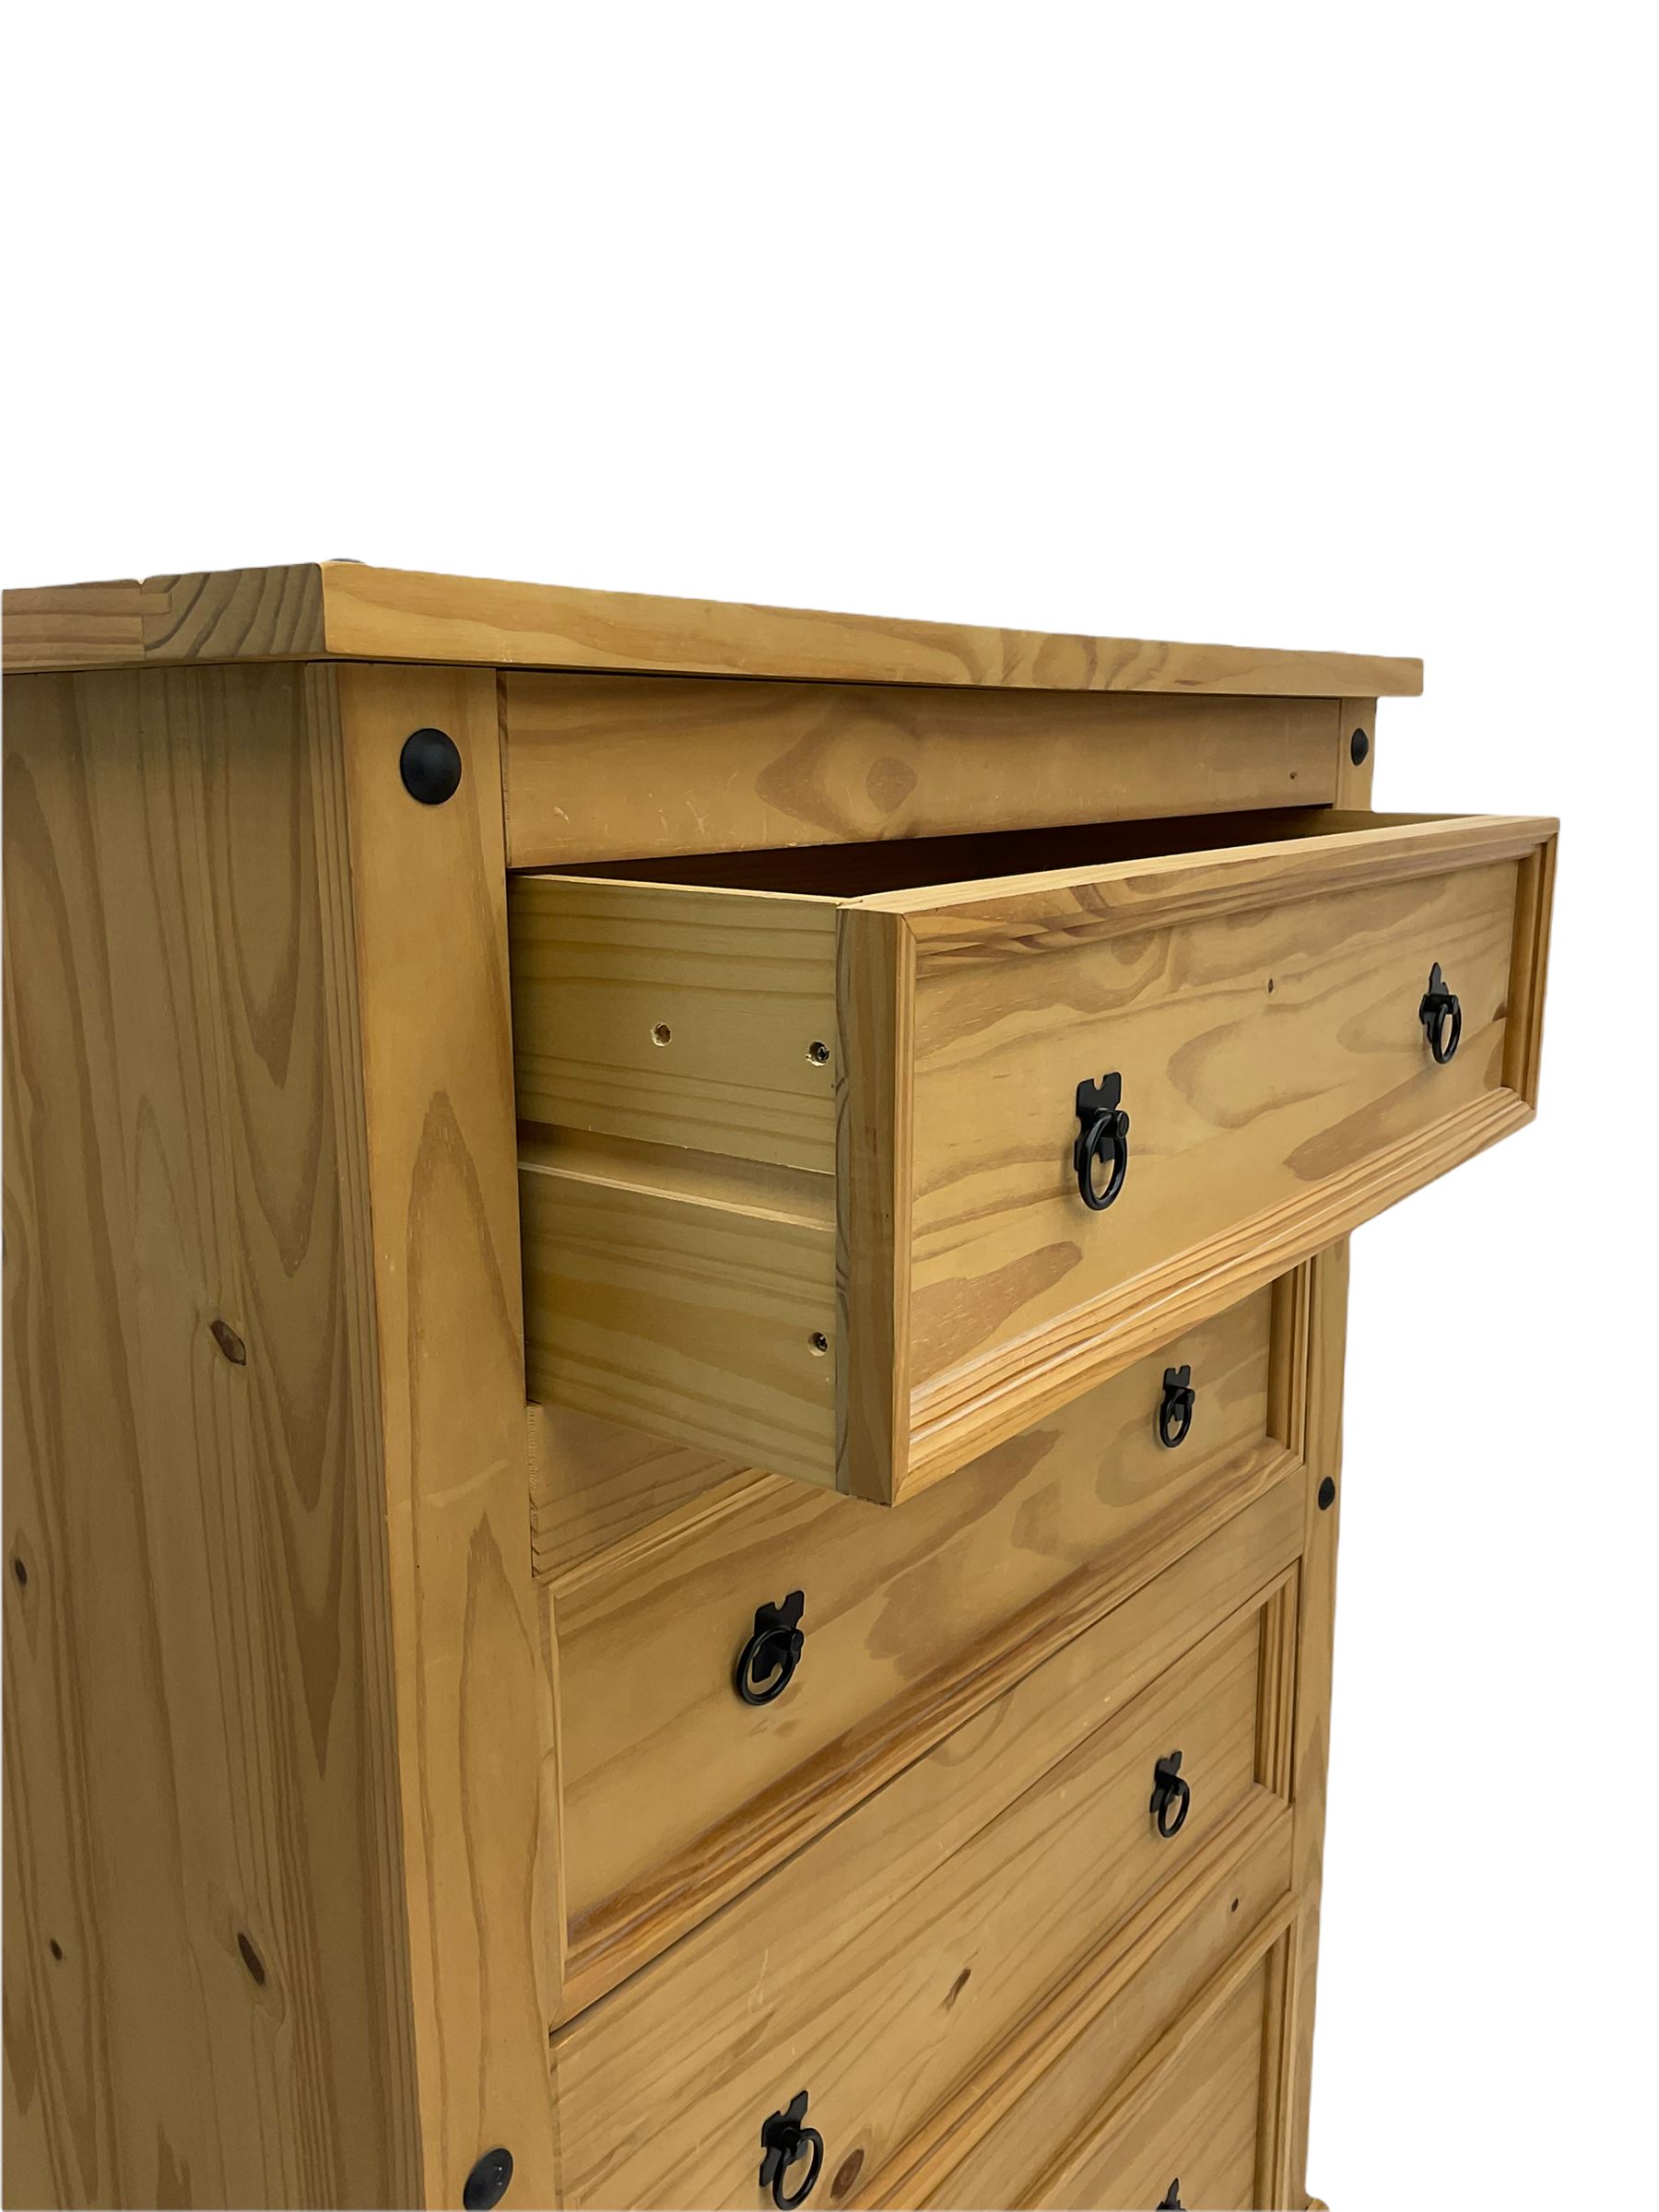 Pine chest fitted with four drawers - Image 3 of 4